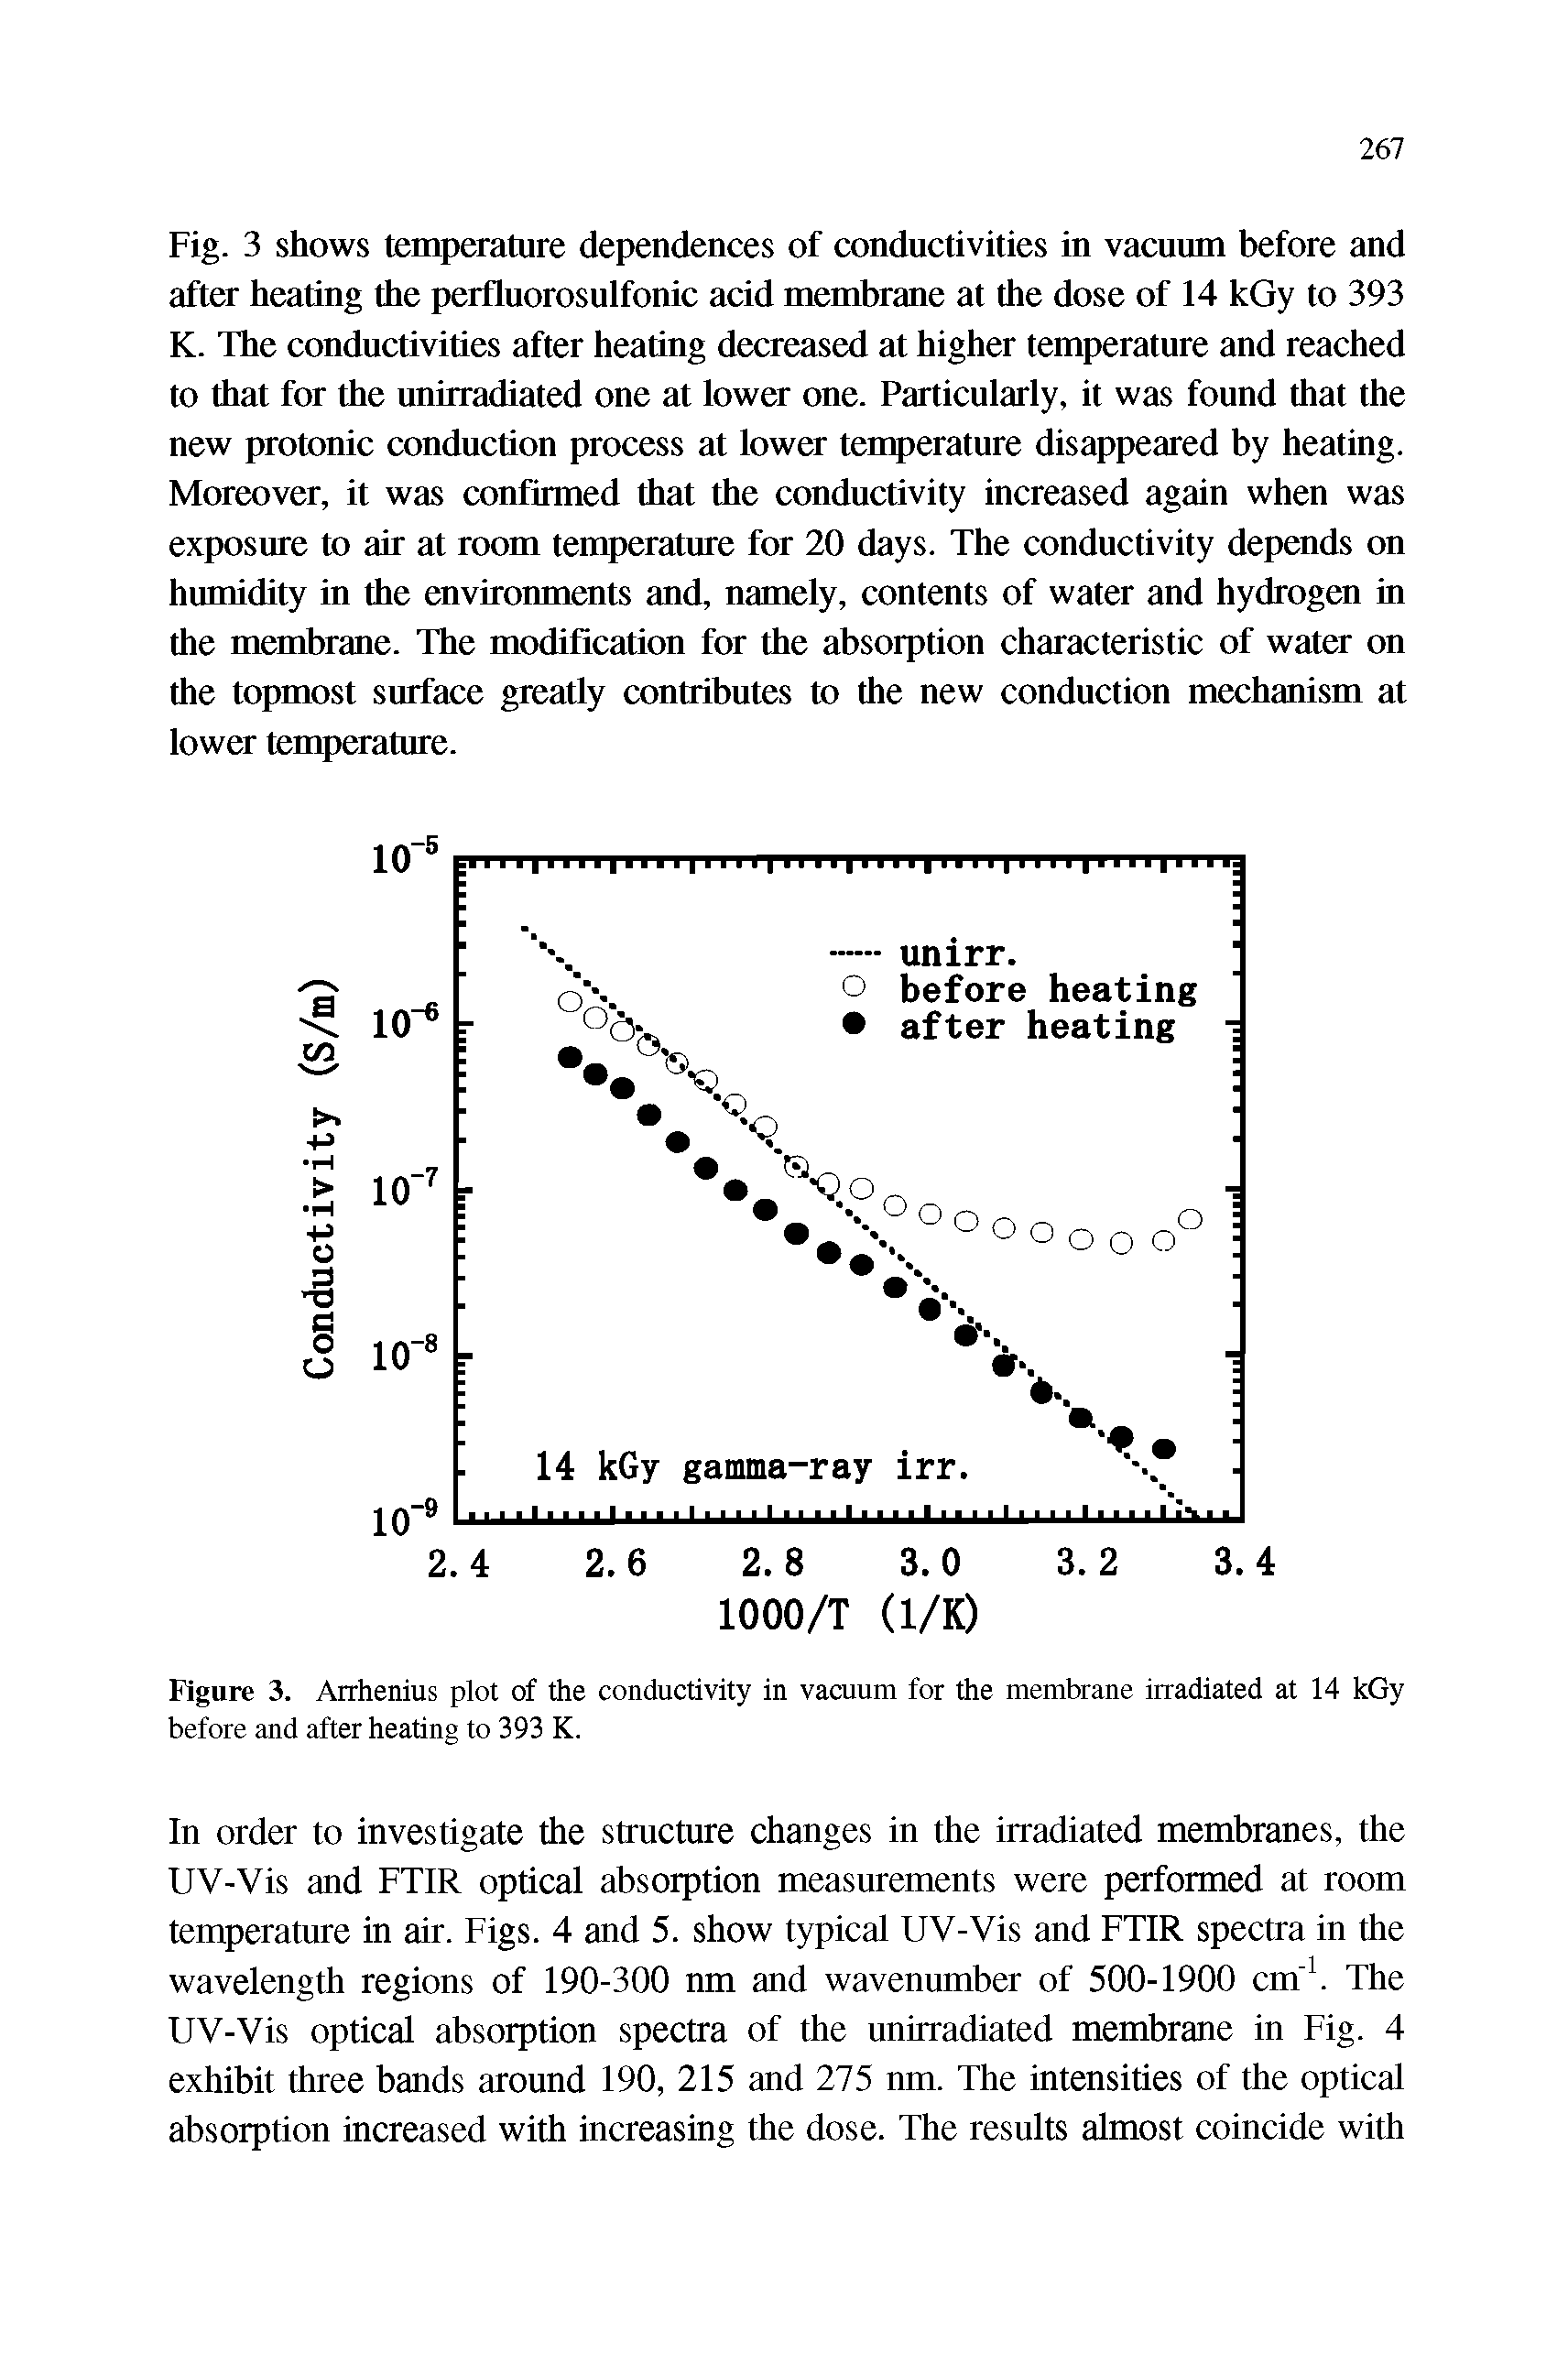 Figure 3. Arrhenius plot of the conductivity in vacuum for the membrane irradiated at 14 kGy before and after heating to 393 K.